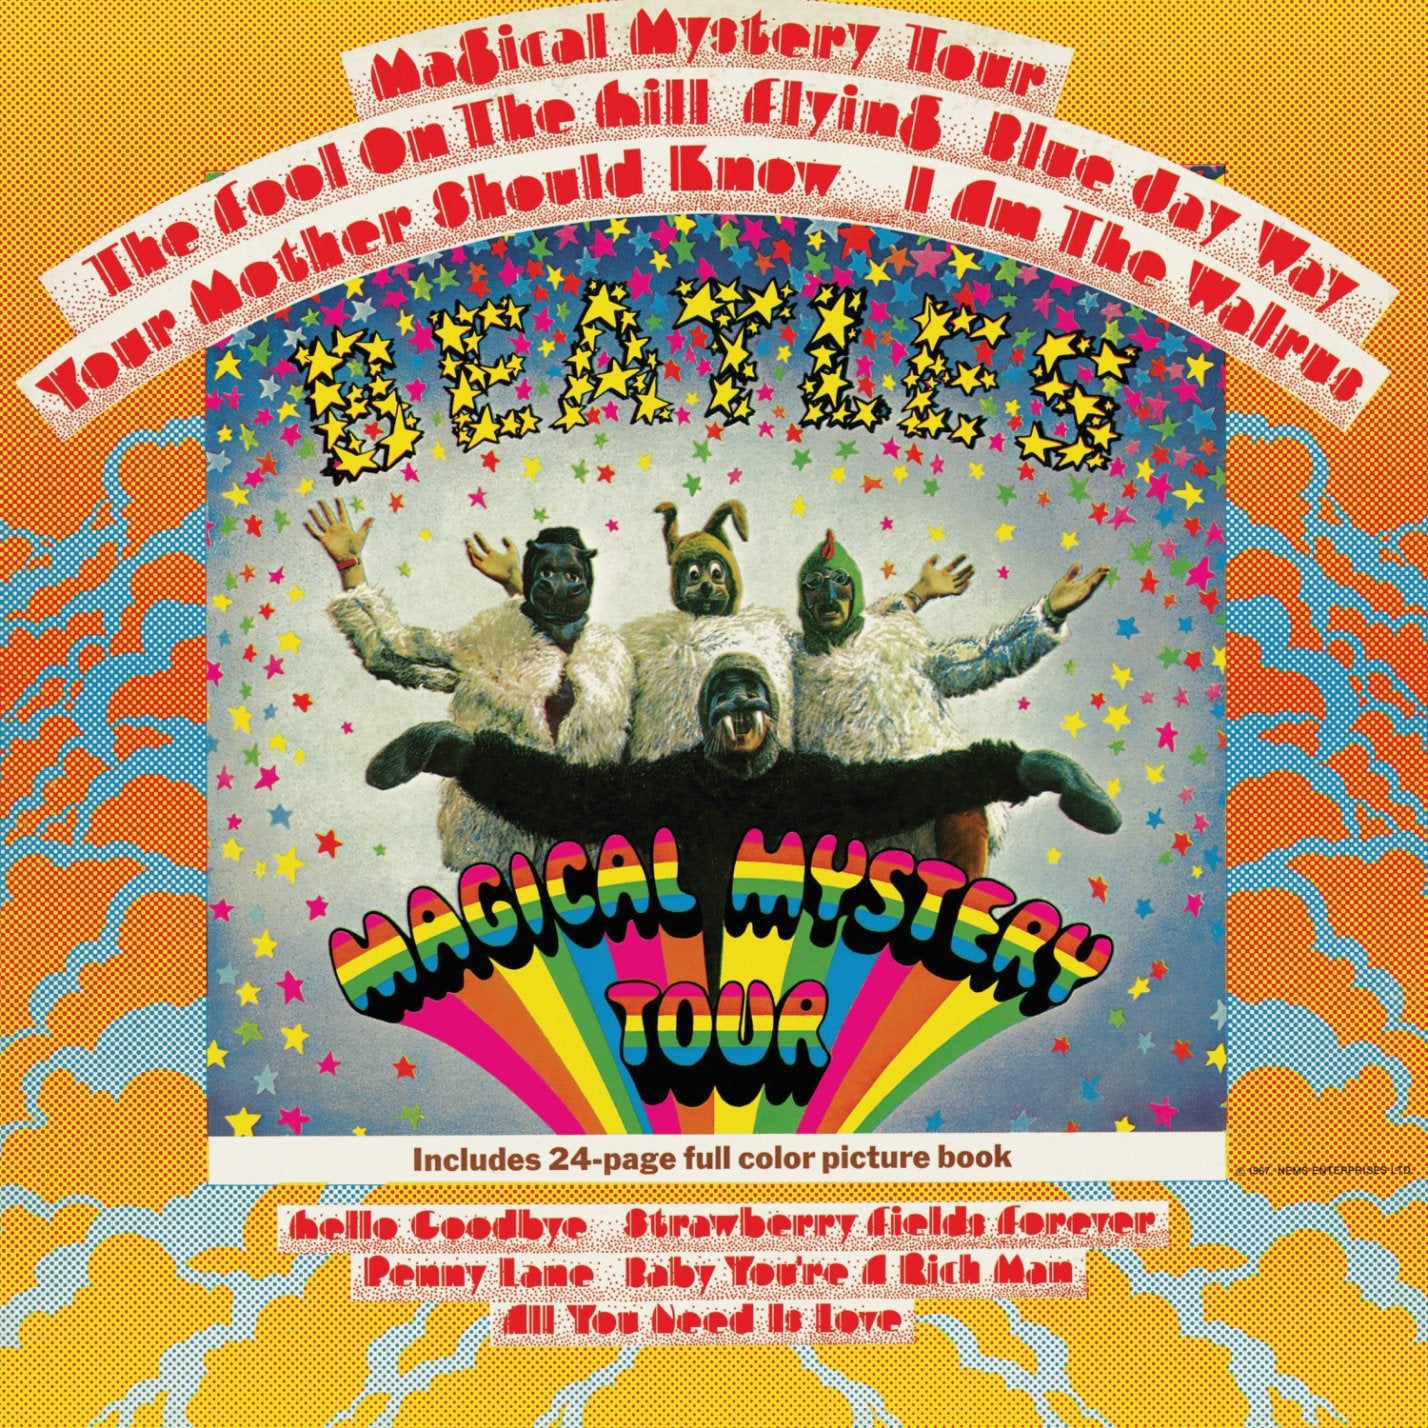 Beatles, The - Magical Mystery Tour (180 Gram, Remastered, Reissue)